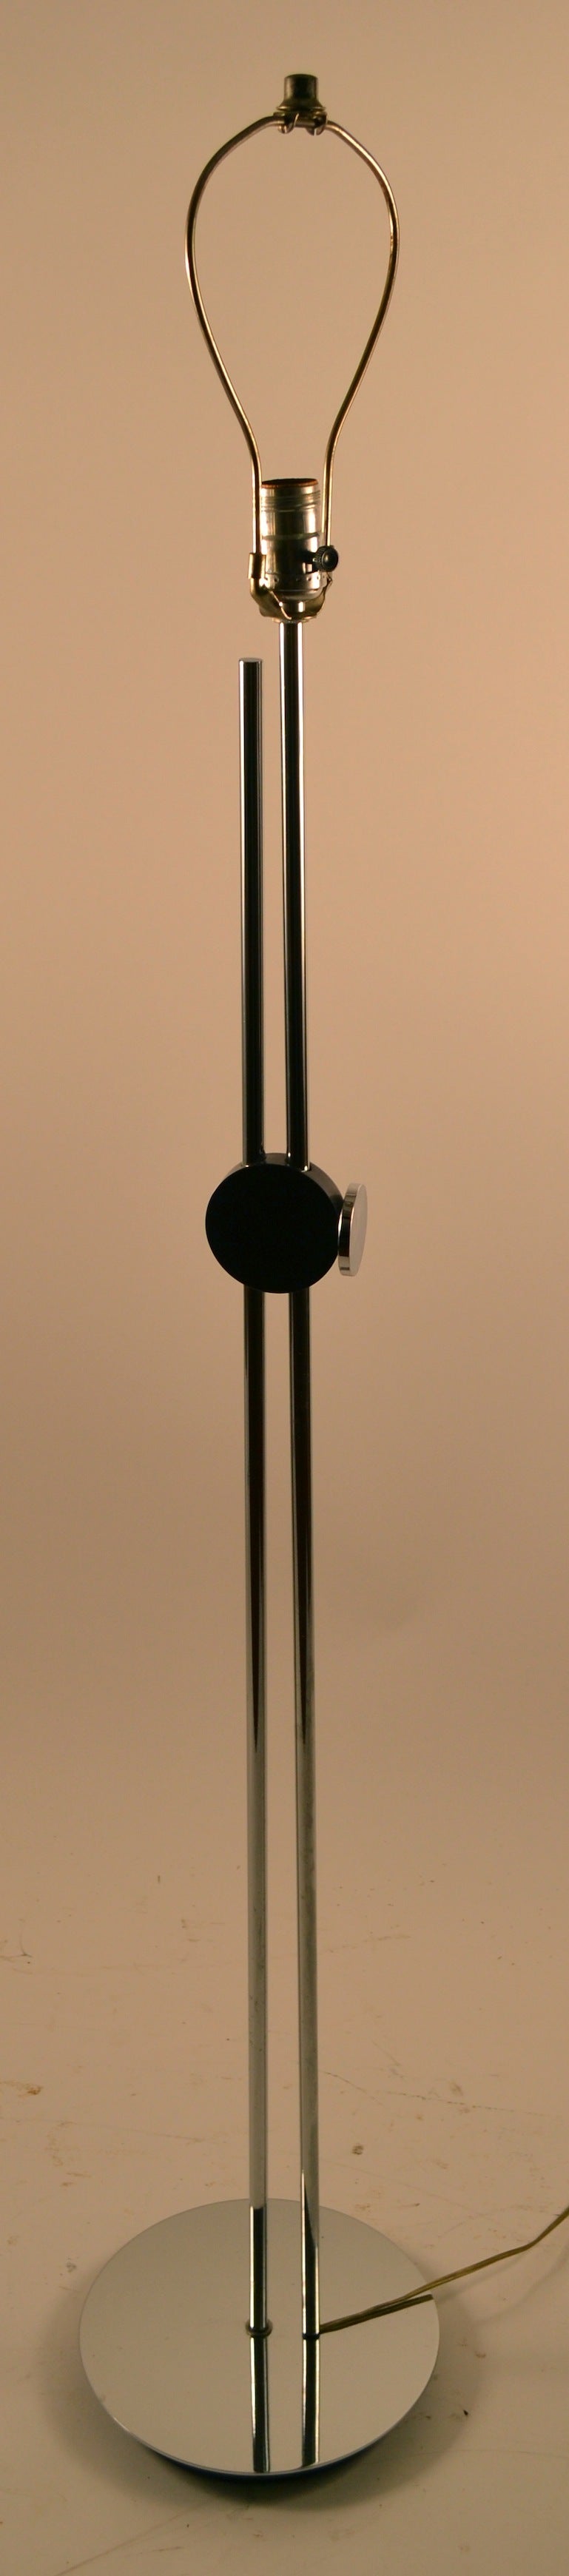 Sleek bright chrome adjustable floor lamp. One rod slides up and down to adjust the height of the shade ( 56